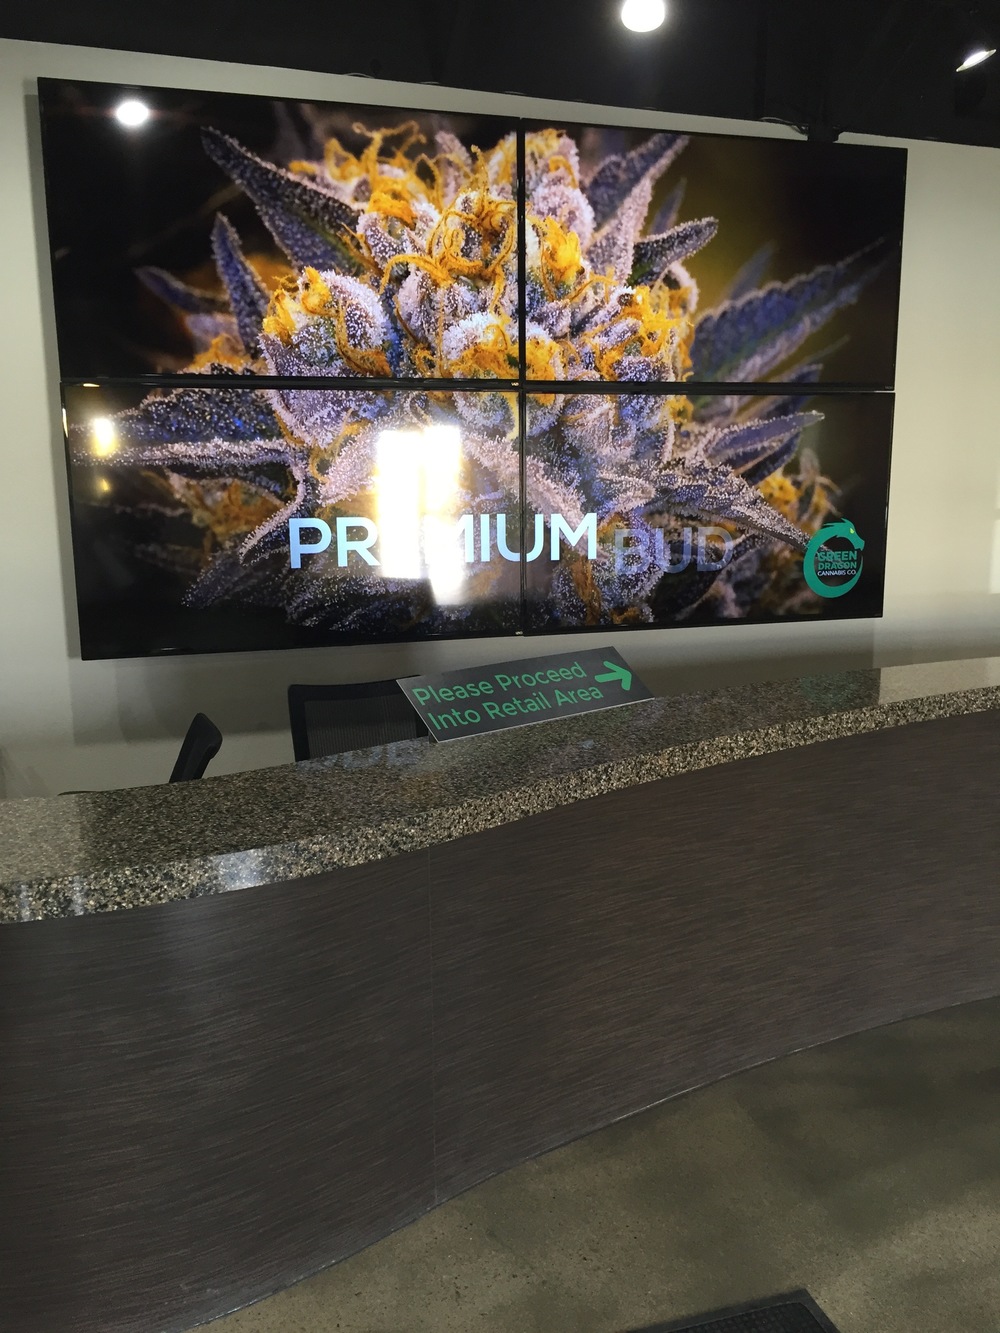 Green Dragon Recreational Weed Dispensary Central Denver